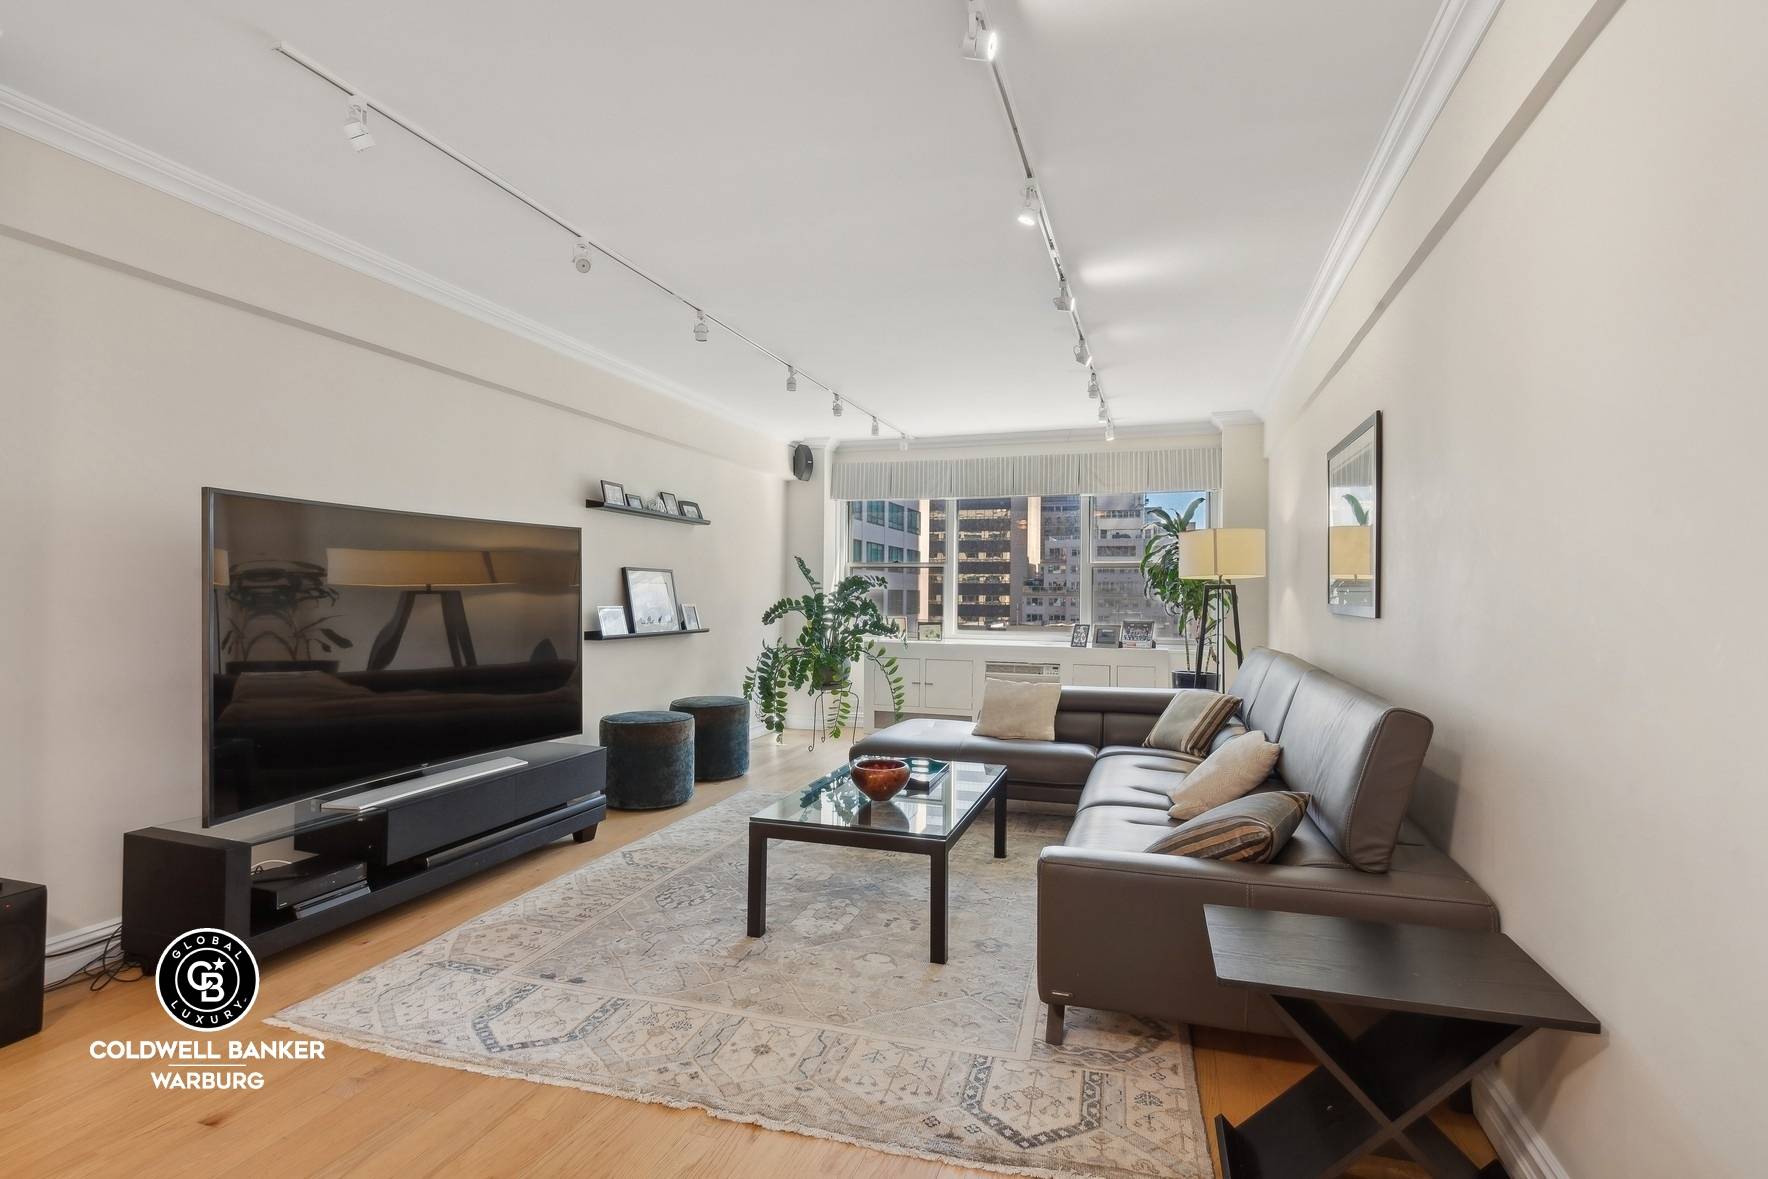 Welcome to Apartment 9B at 333 East 46th Street, a spacious and bright two bedroom, two bathroom residence in the desirable Midtown East area of Manhattan.